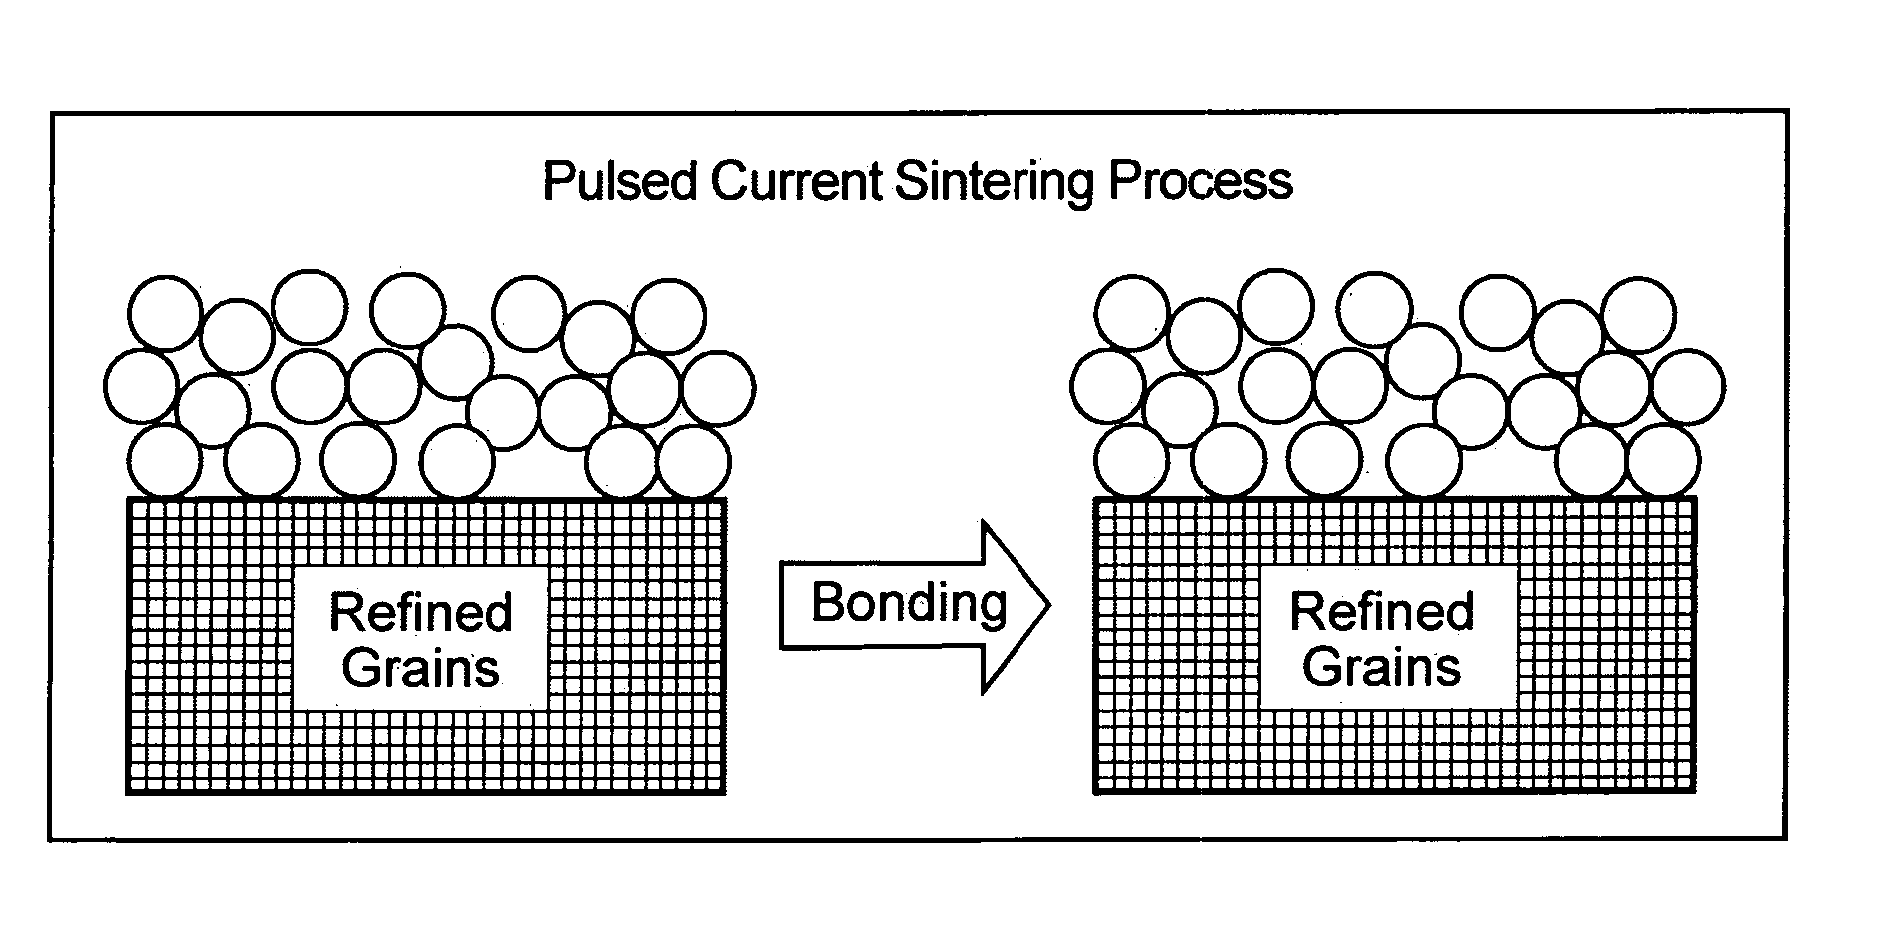 Pulsed current sintering for surfaces of medical implants